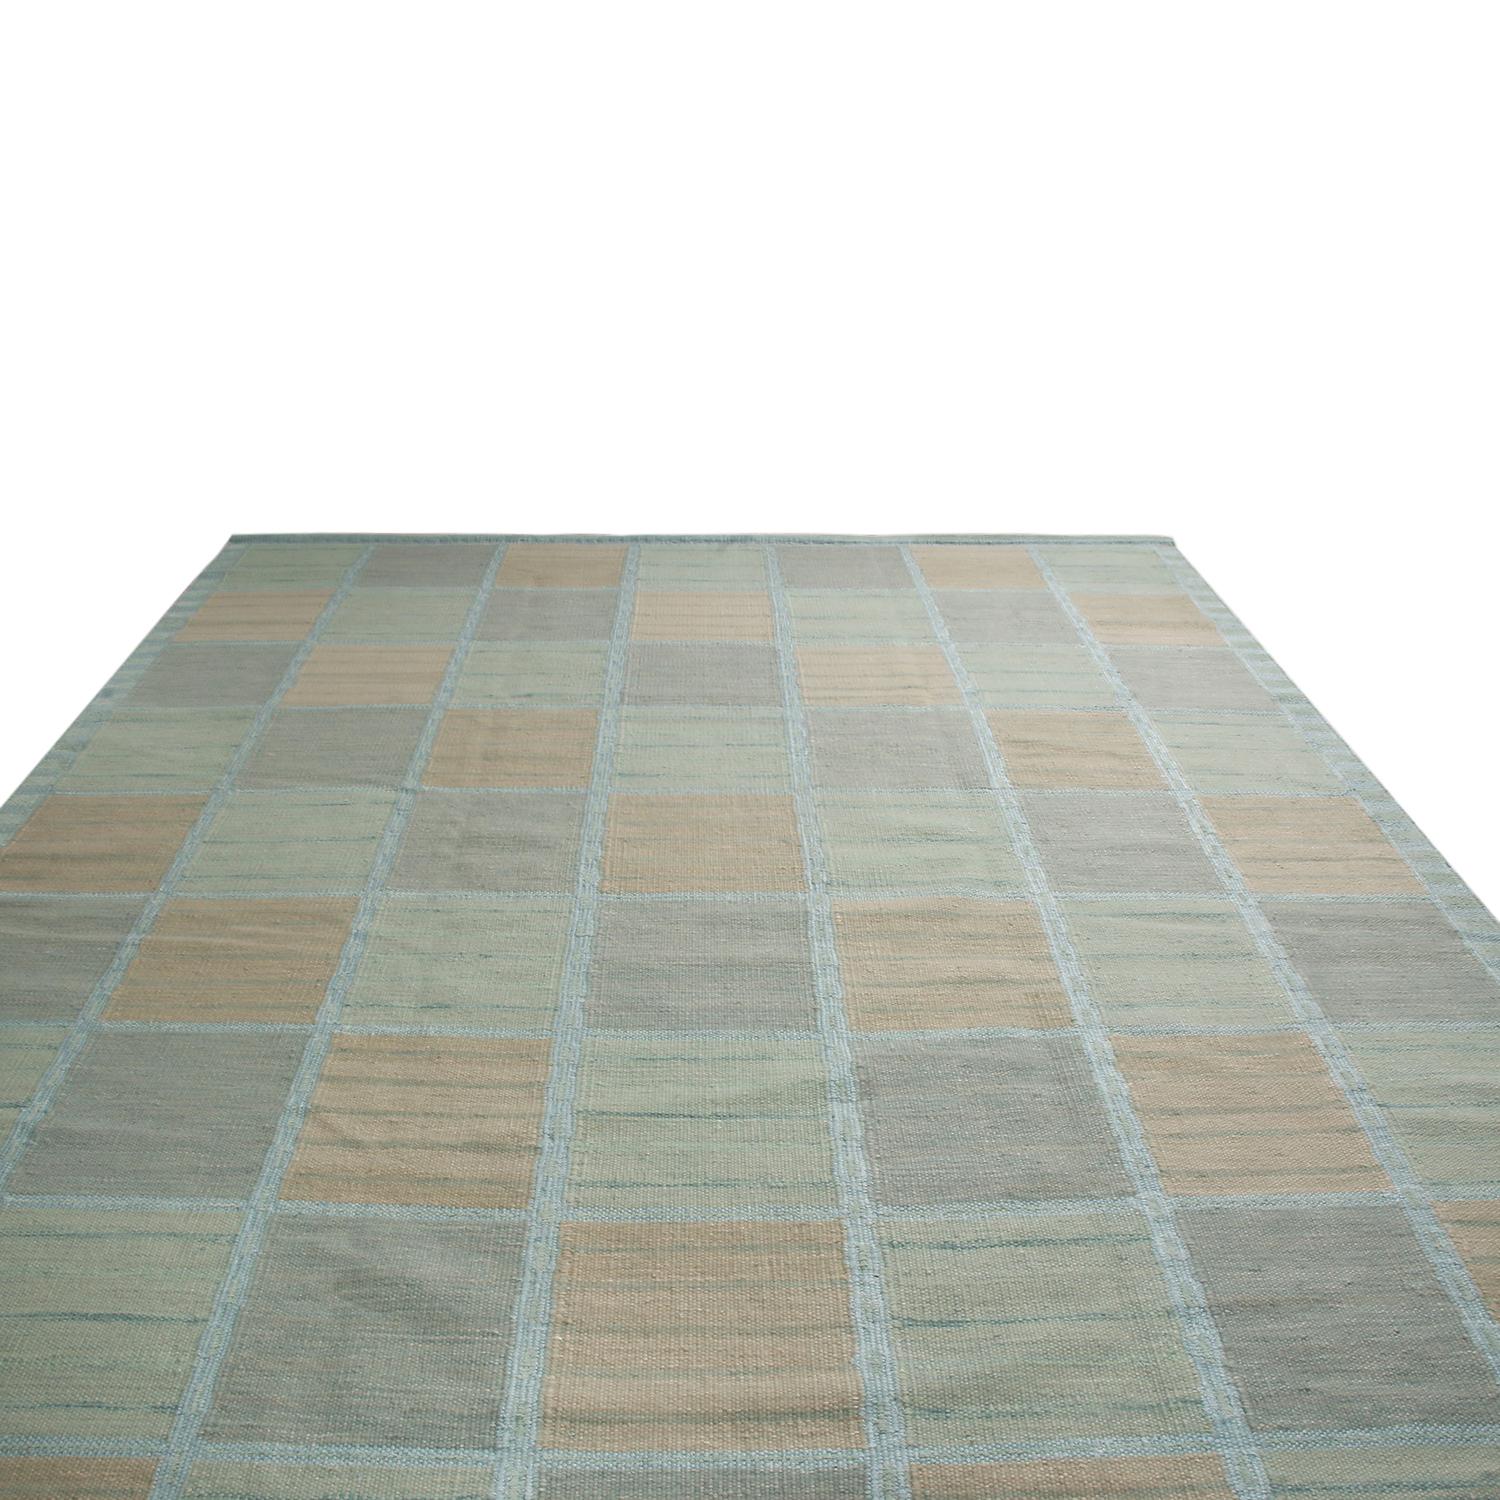 Originating from India, this hand knotted pile rug hails from Rug & Kilim’s Scandinavian-inspired collection, bound in high-quality New Zealand wool featuring a Fine patchwork geometric field design in multi-tonal Seafoam green-blue colorways with